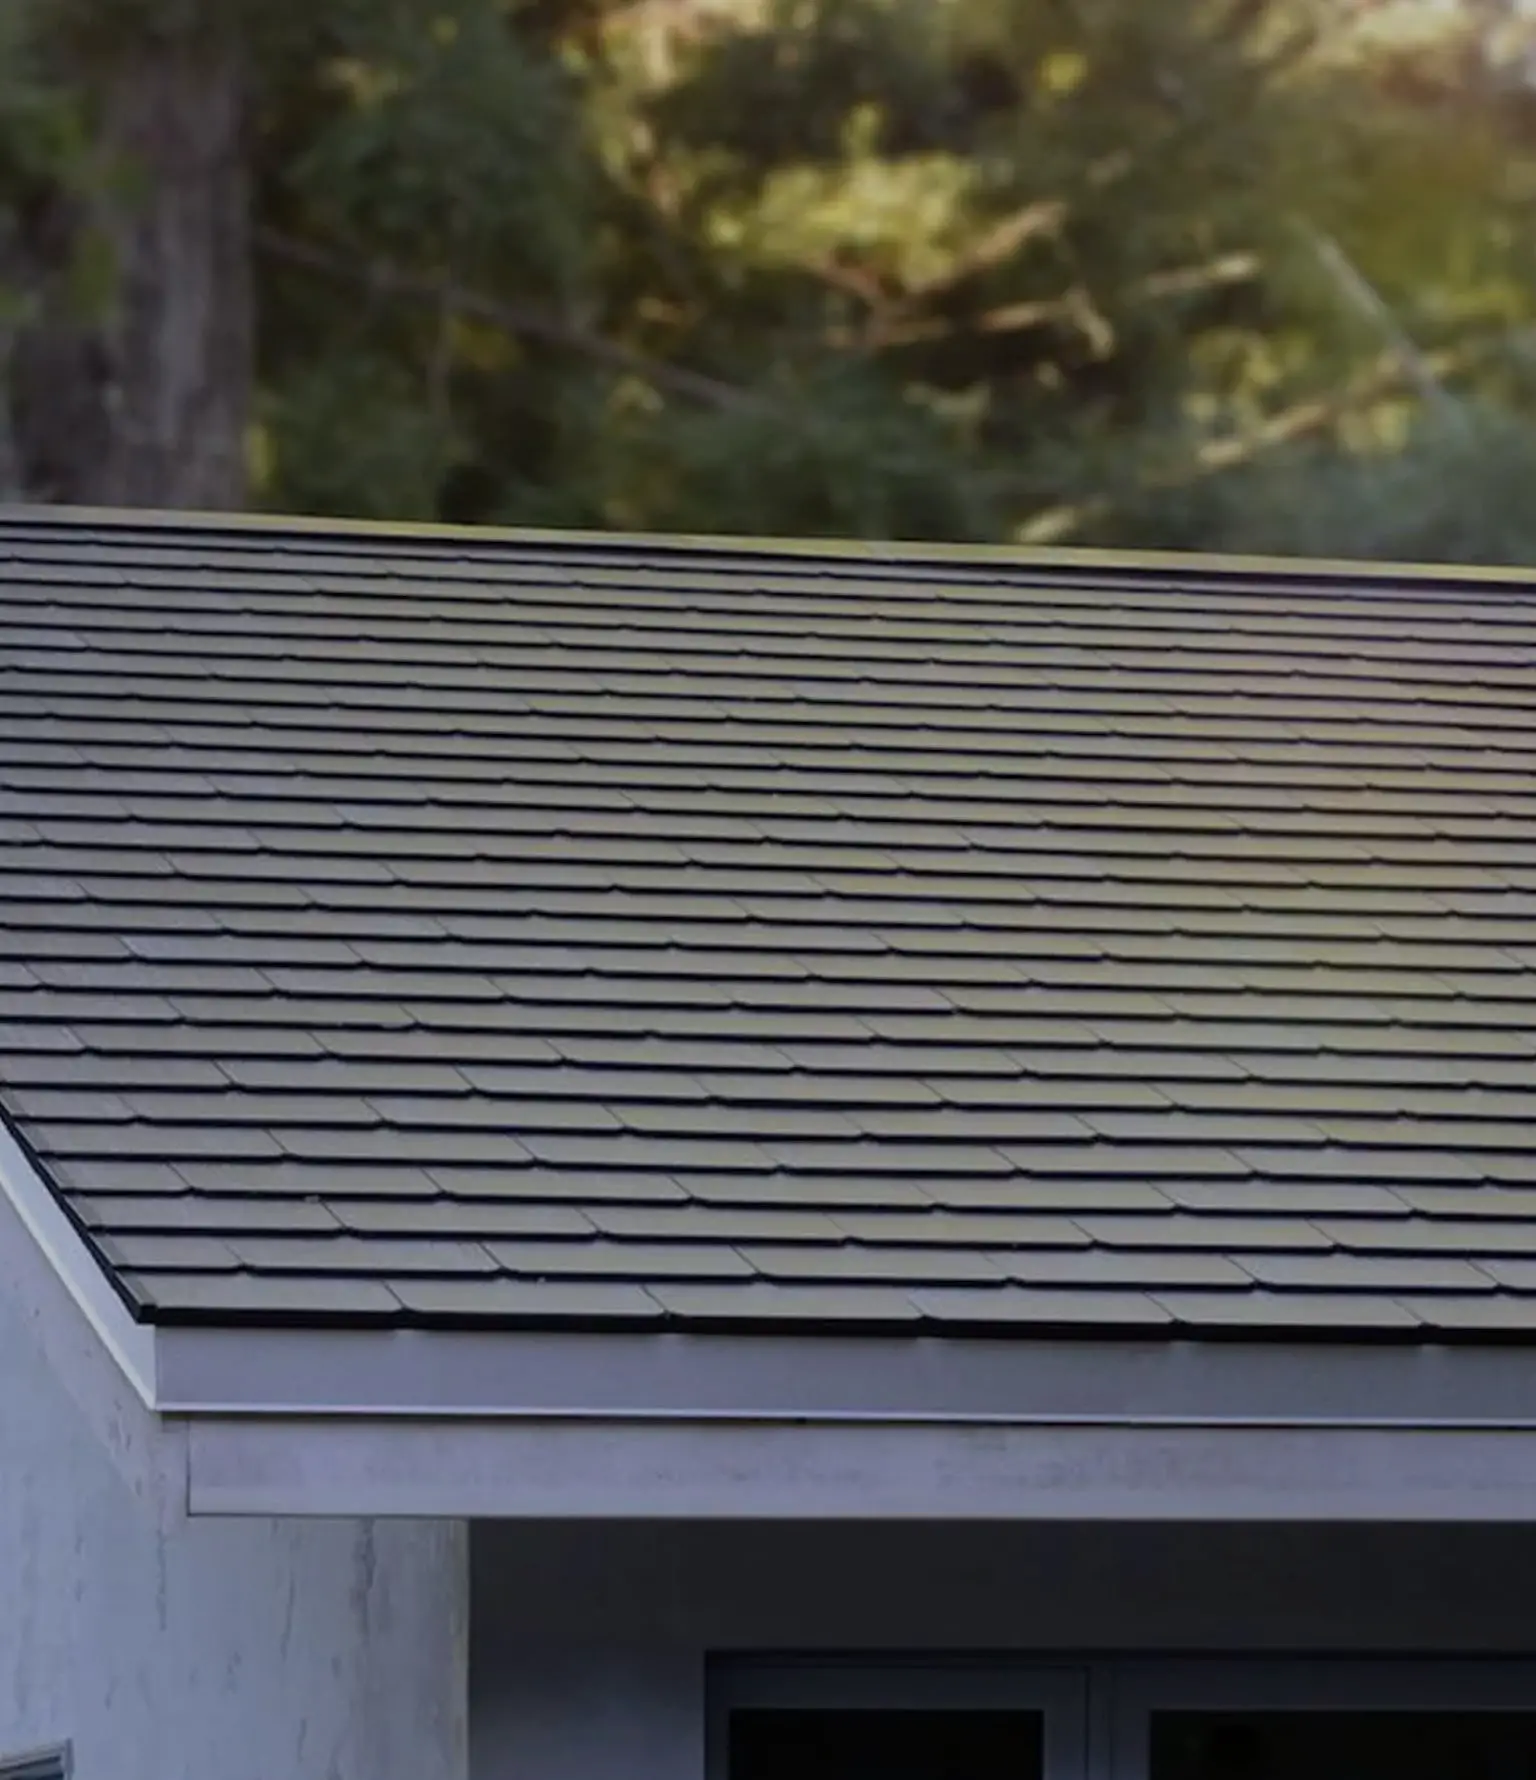 Tesla Solar Roof: Company Shines With High Sales Stats in Earnings Call